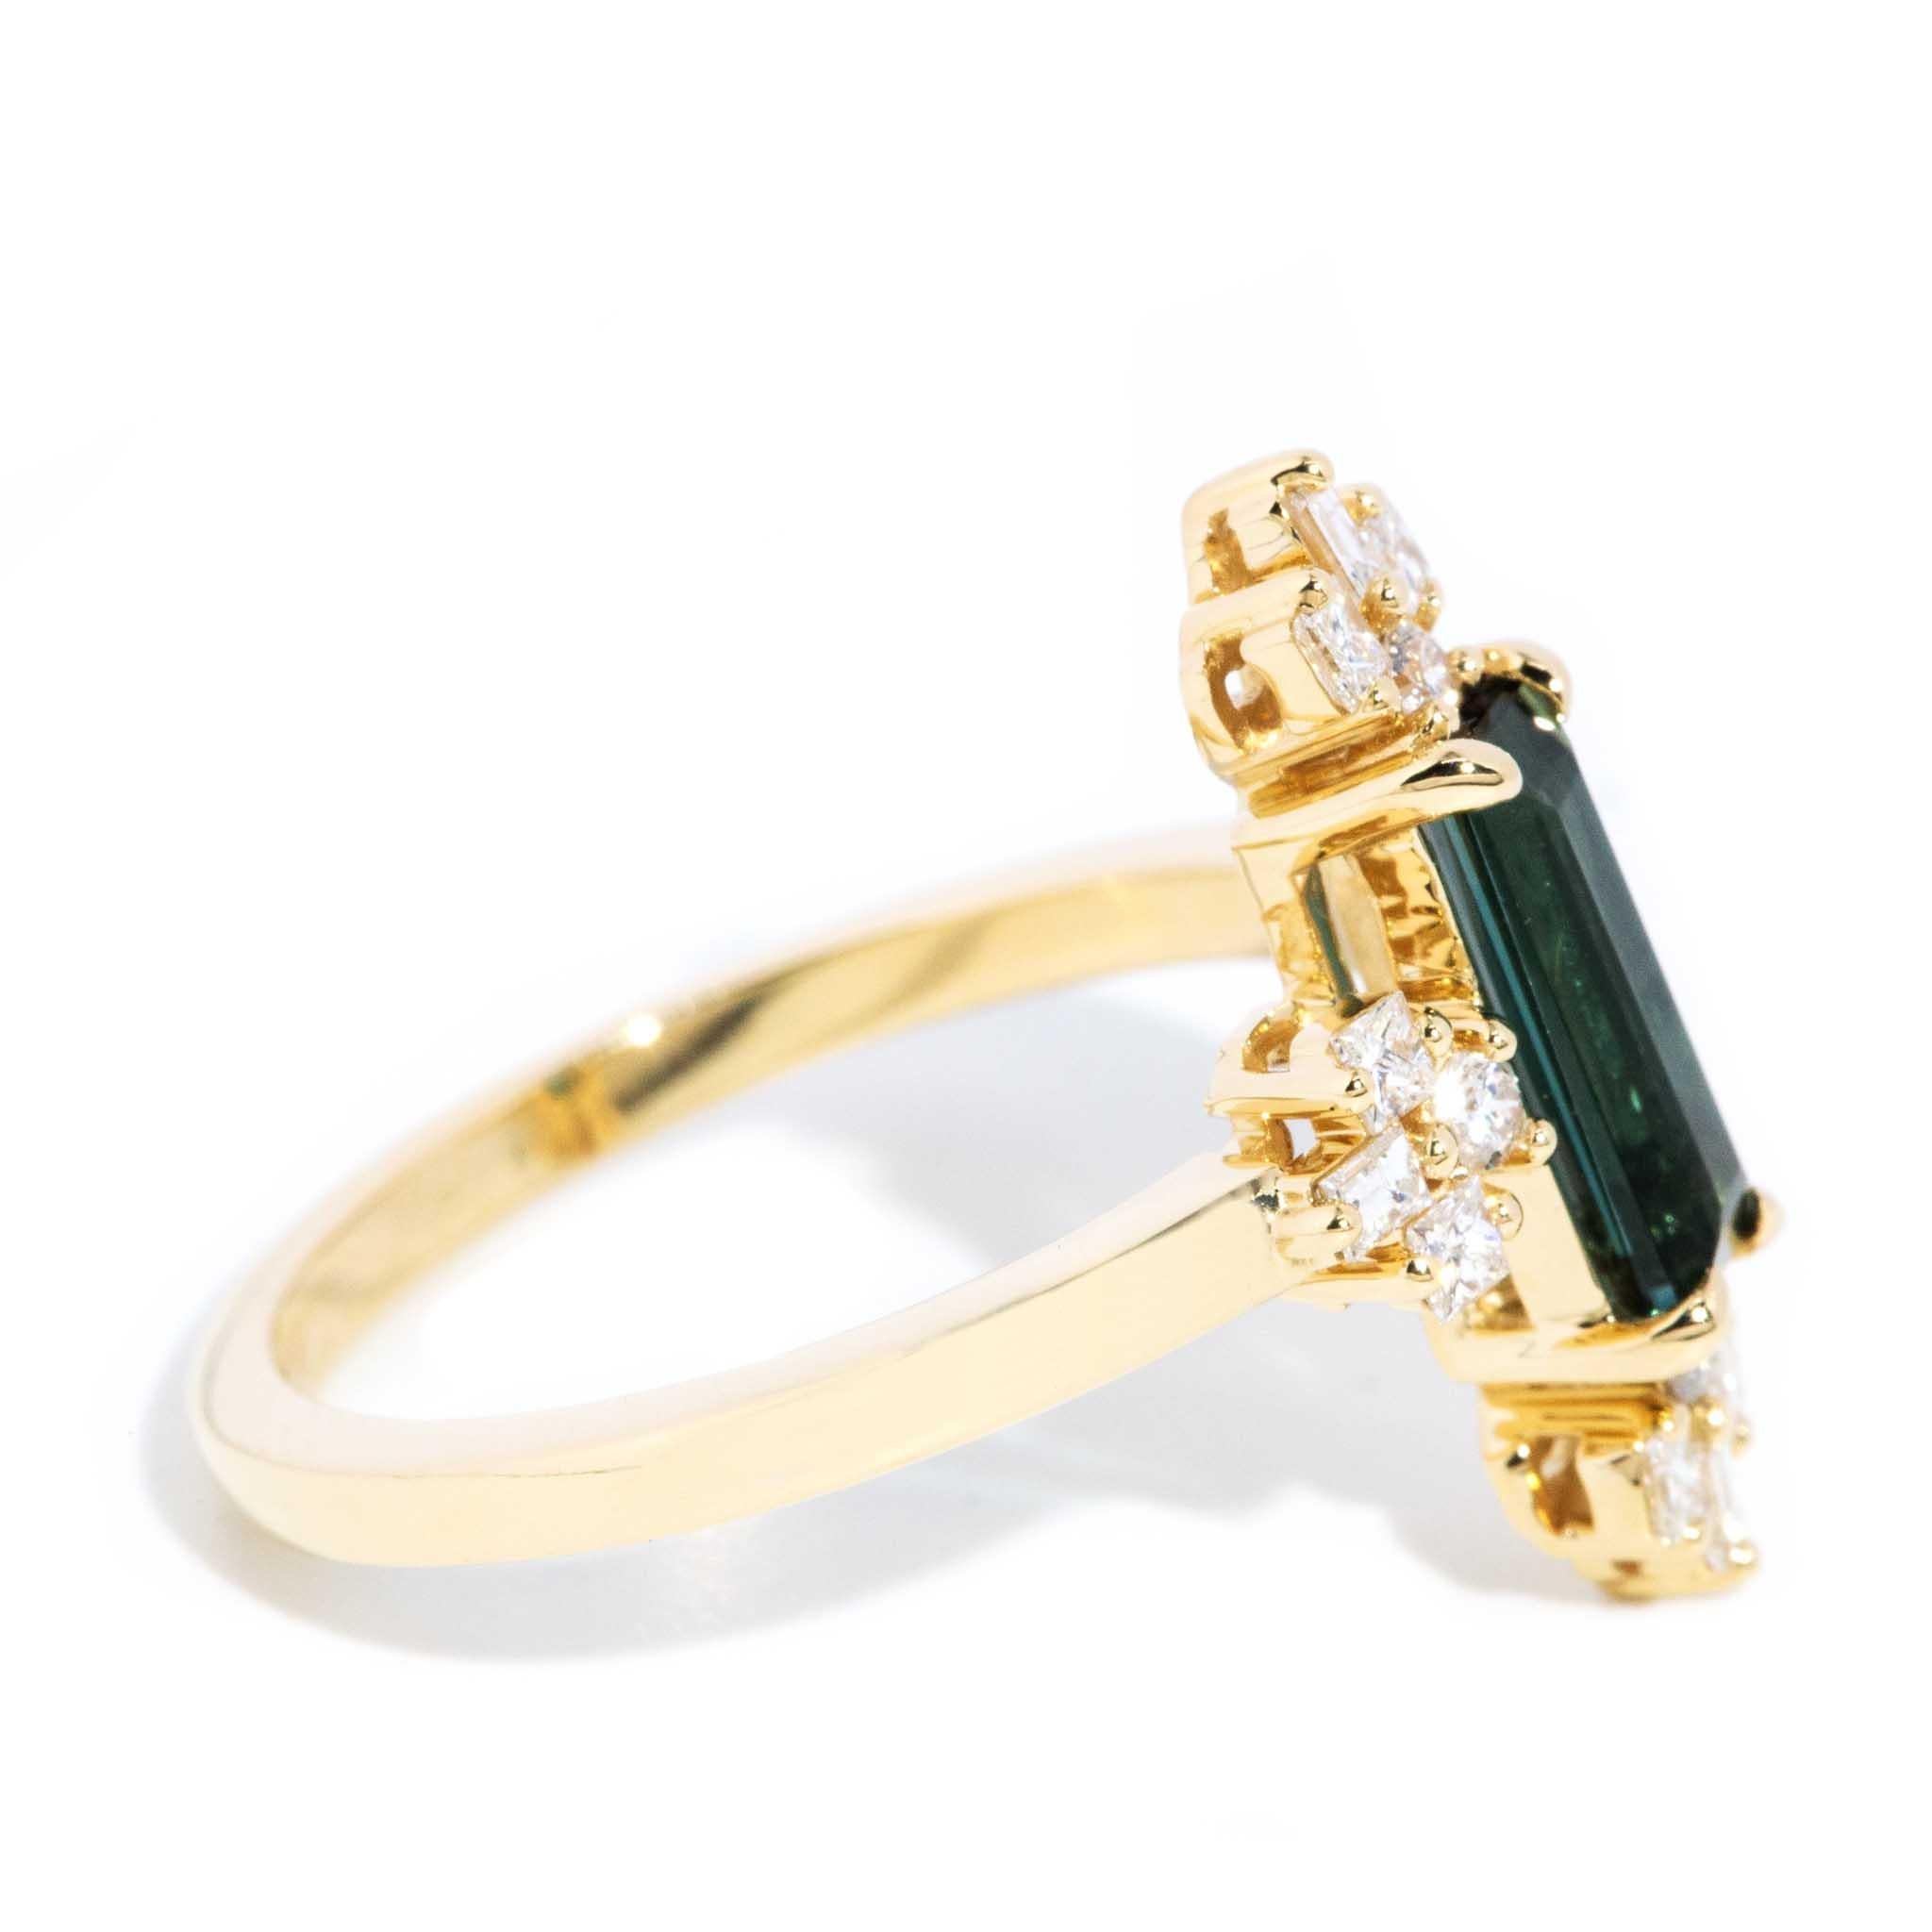 Contemporary Baguette Indicolite Tourmaline & Diamond Ring 18 Carat Yellow Gold For Sale 2